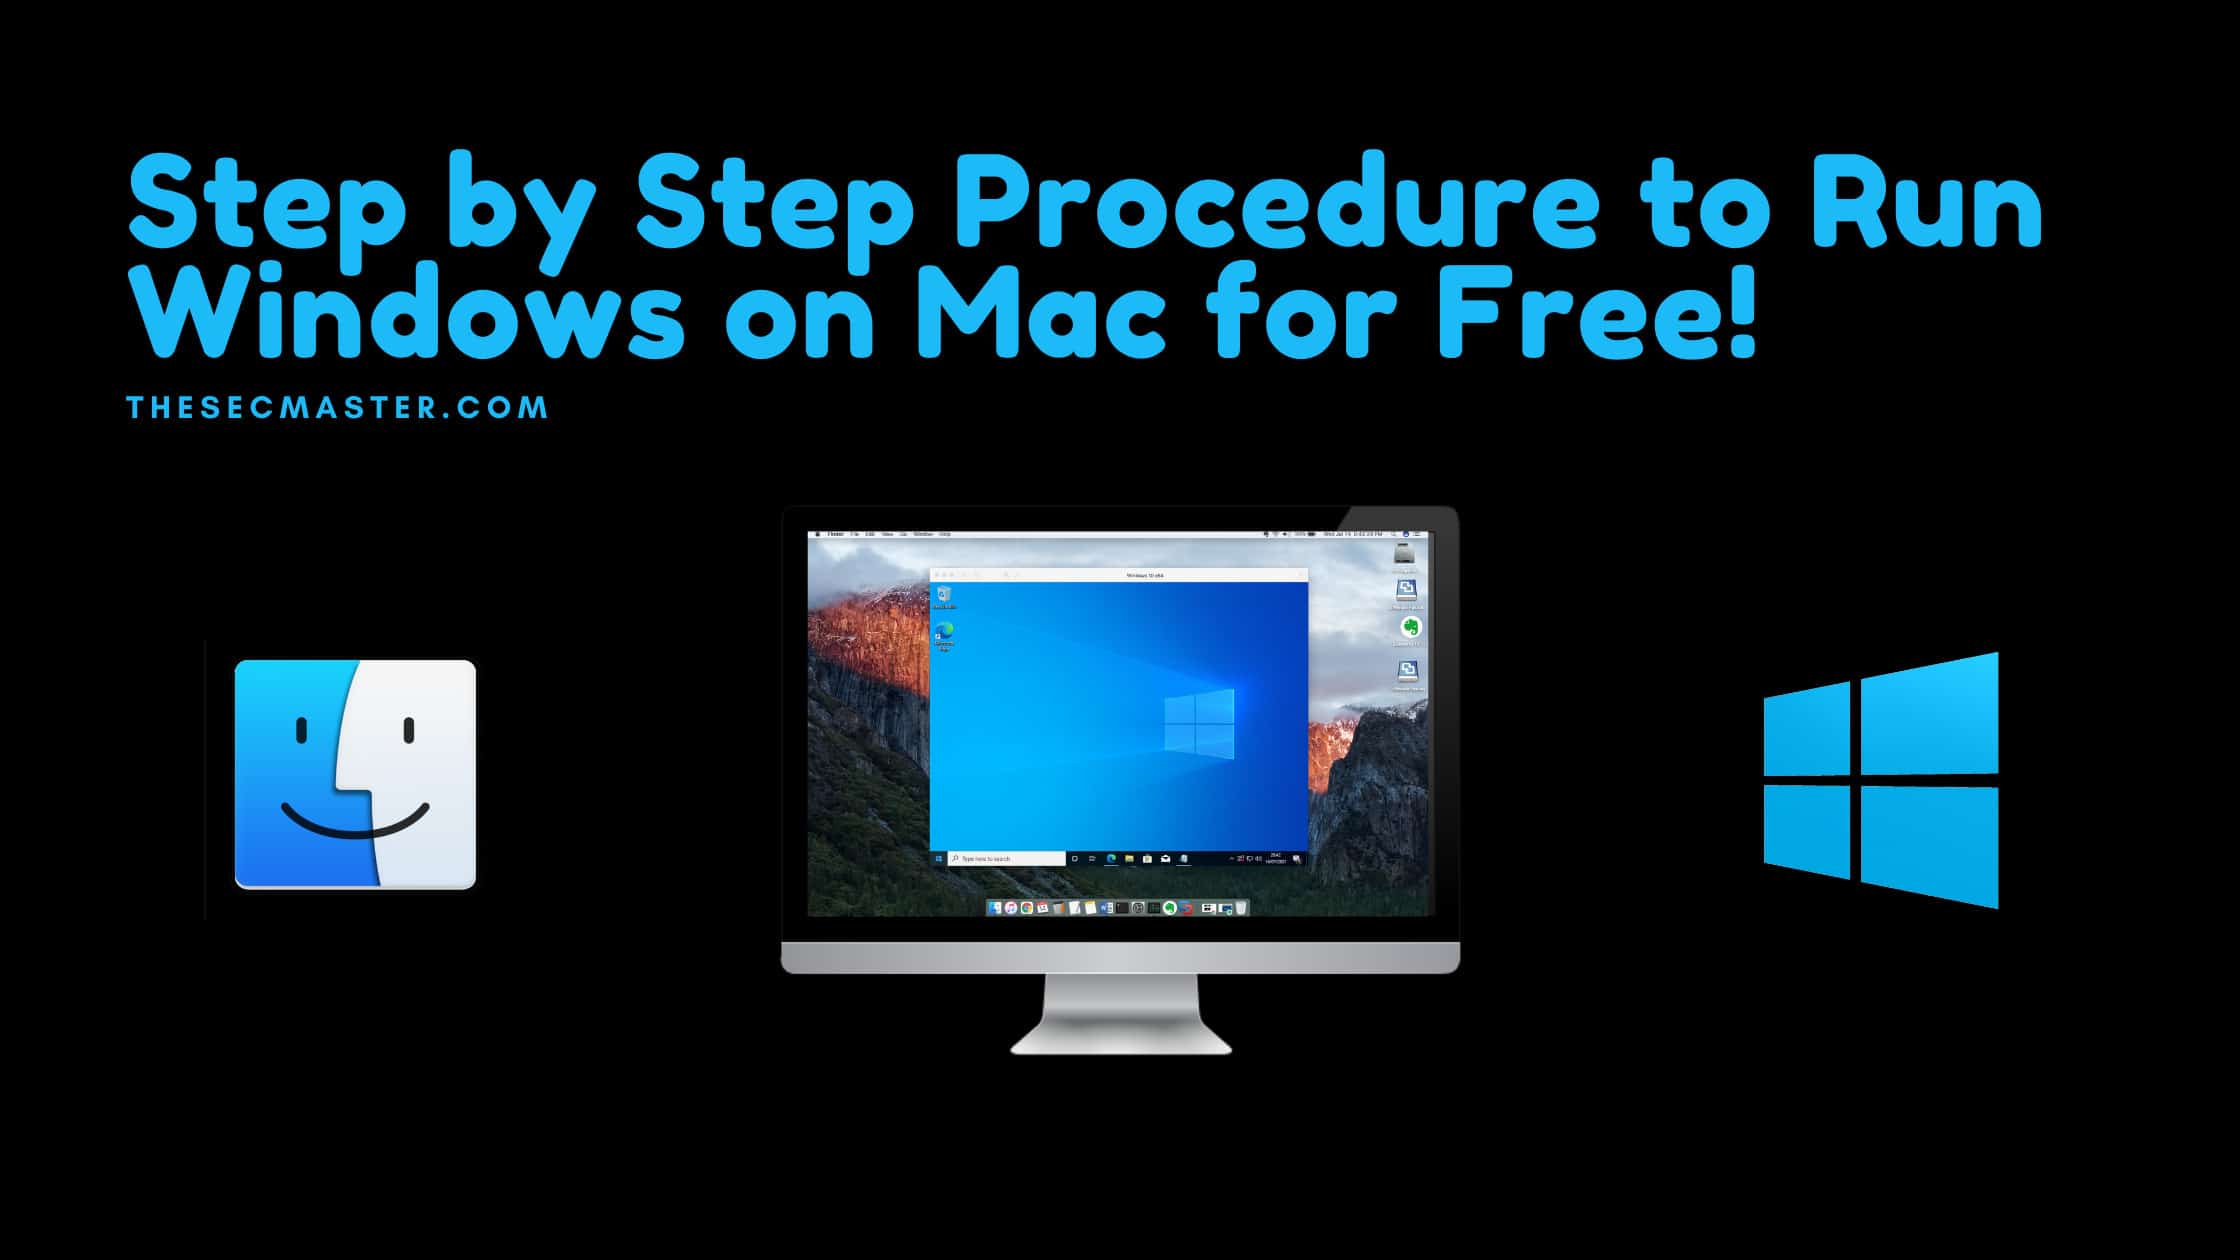 Step By Step Procedure To Run Windows On Mac For Free